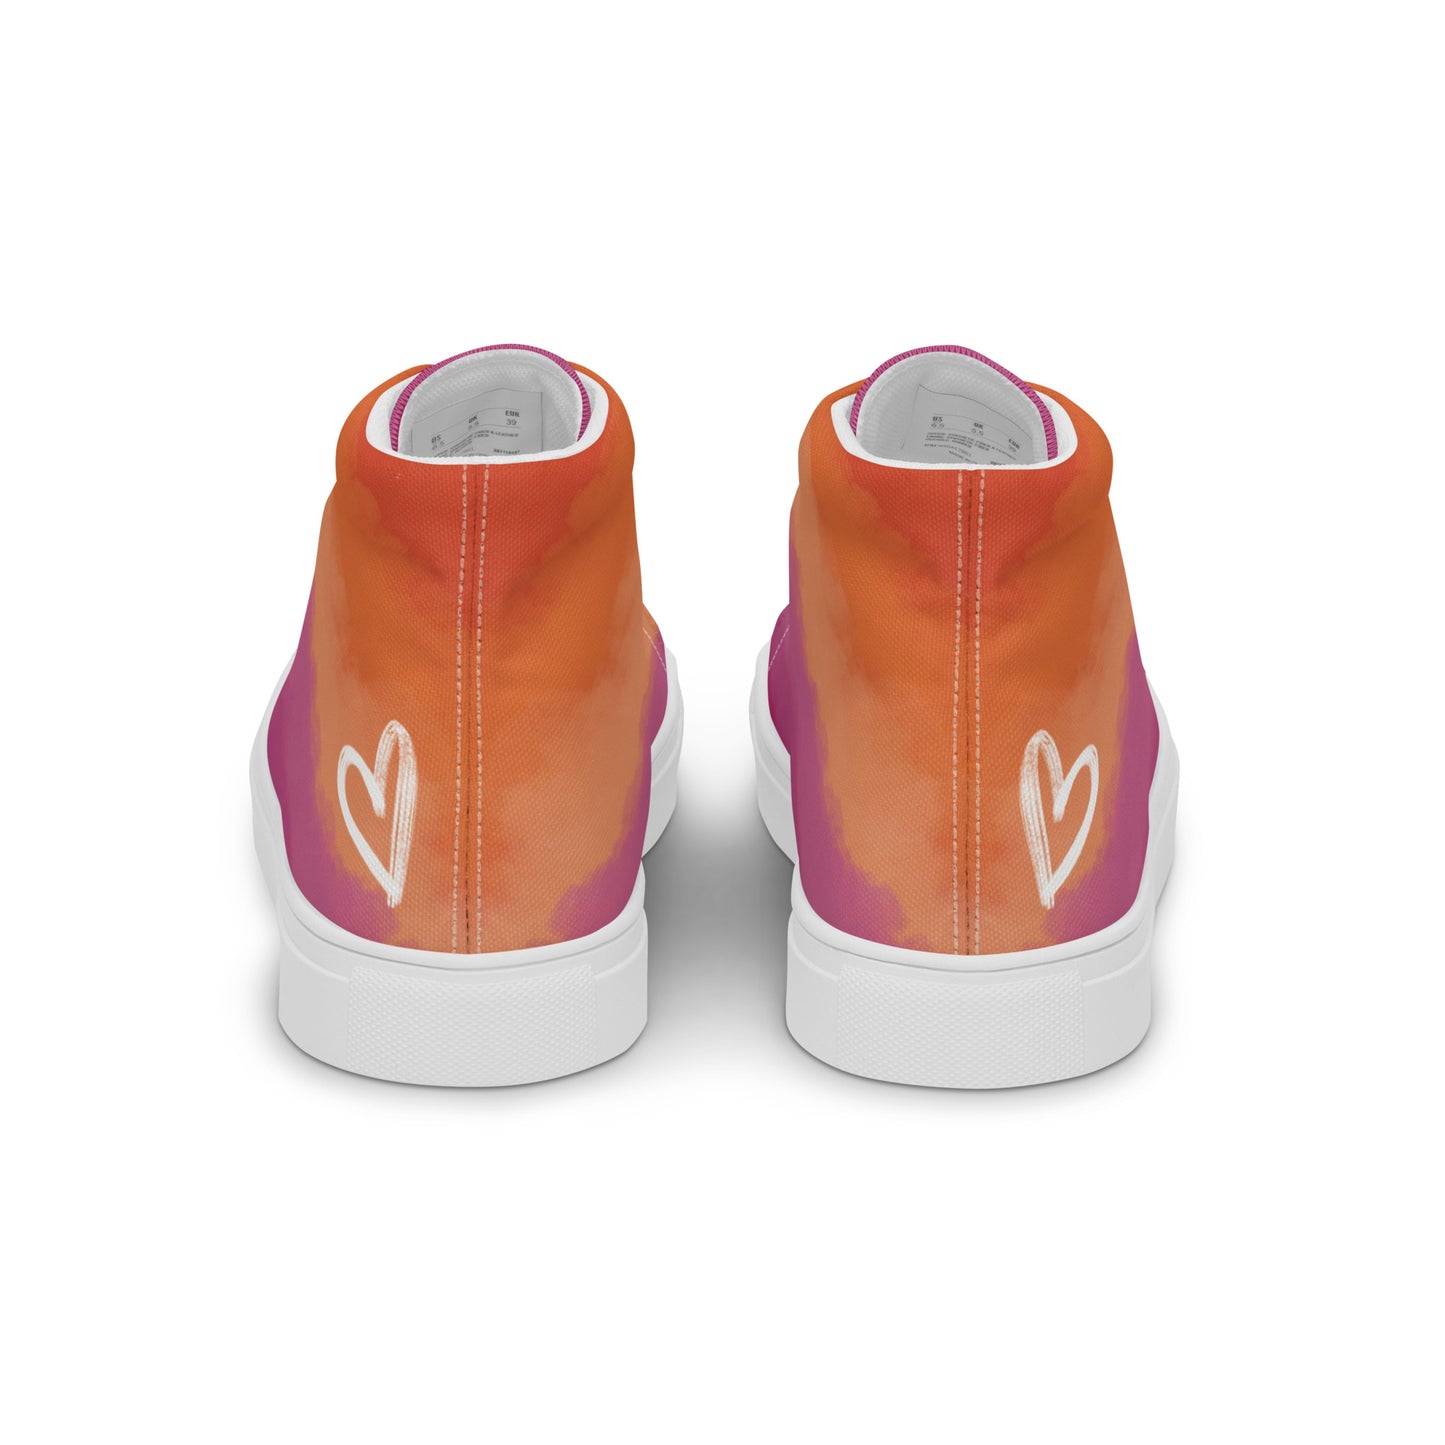 Back view: A pair of high top shoes with cloud layers in the lesbian flag colors, a white heart on the heel, and the Aras Sivad Studio logo on the tongue.